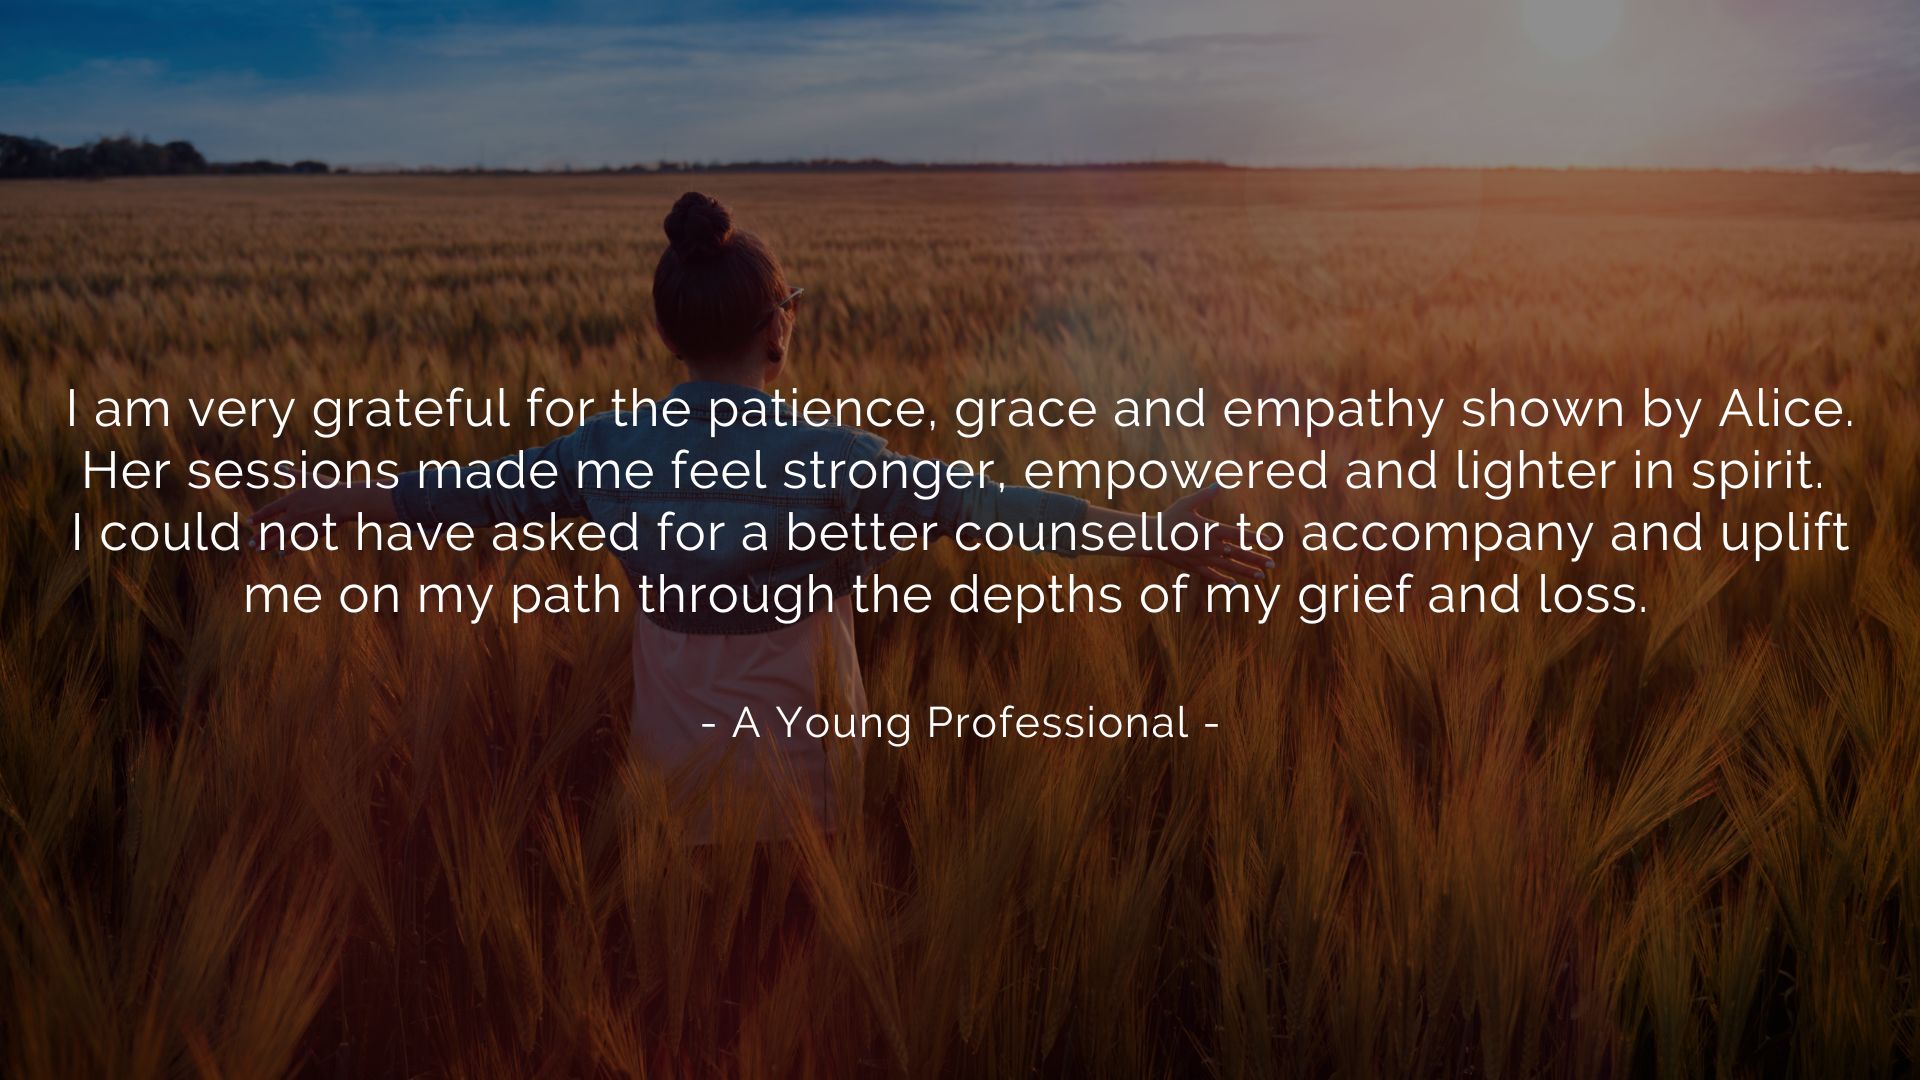 A young professional thanks Alice for helping her face her trauma